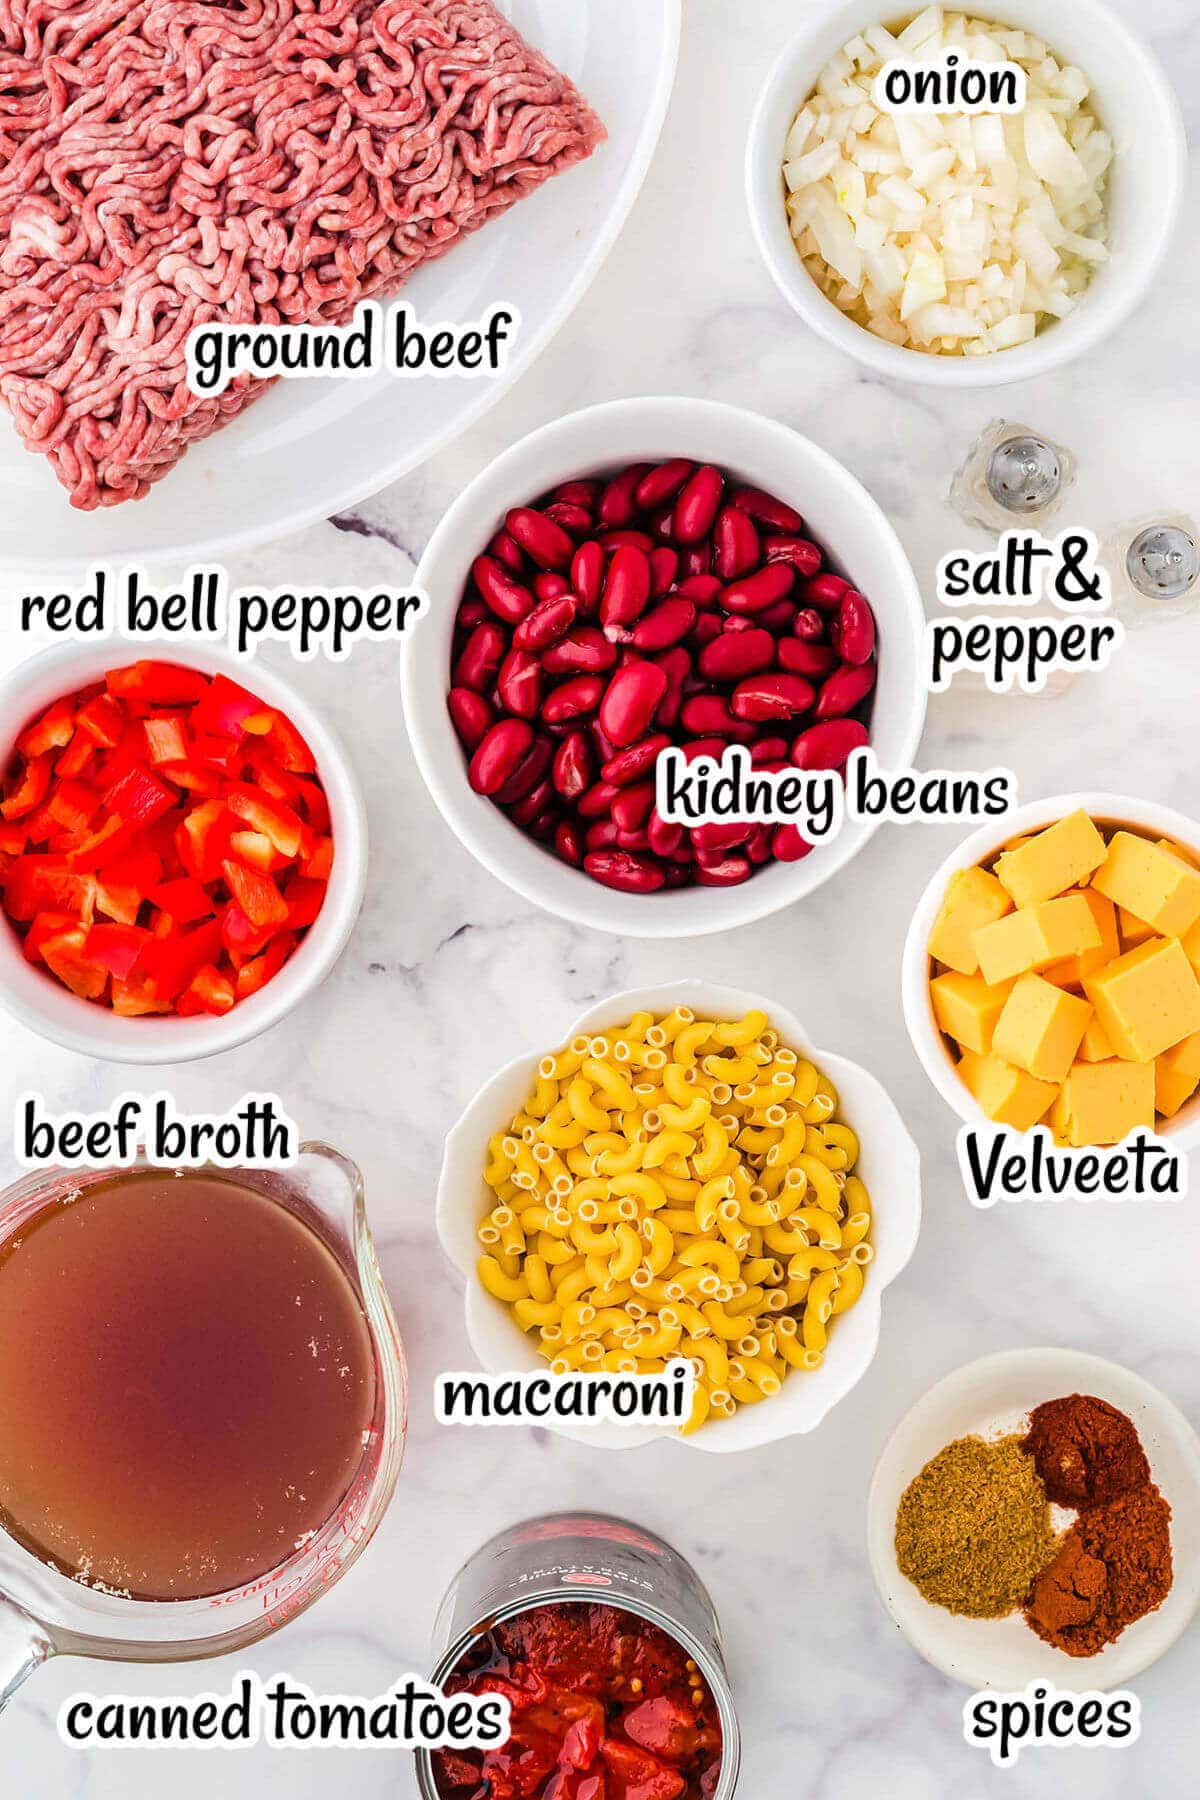 Here are the ingredients you'll need to make this recipe.